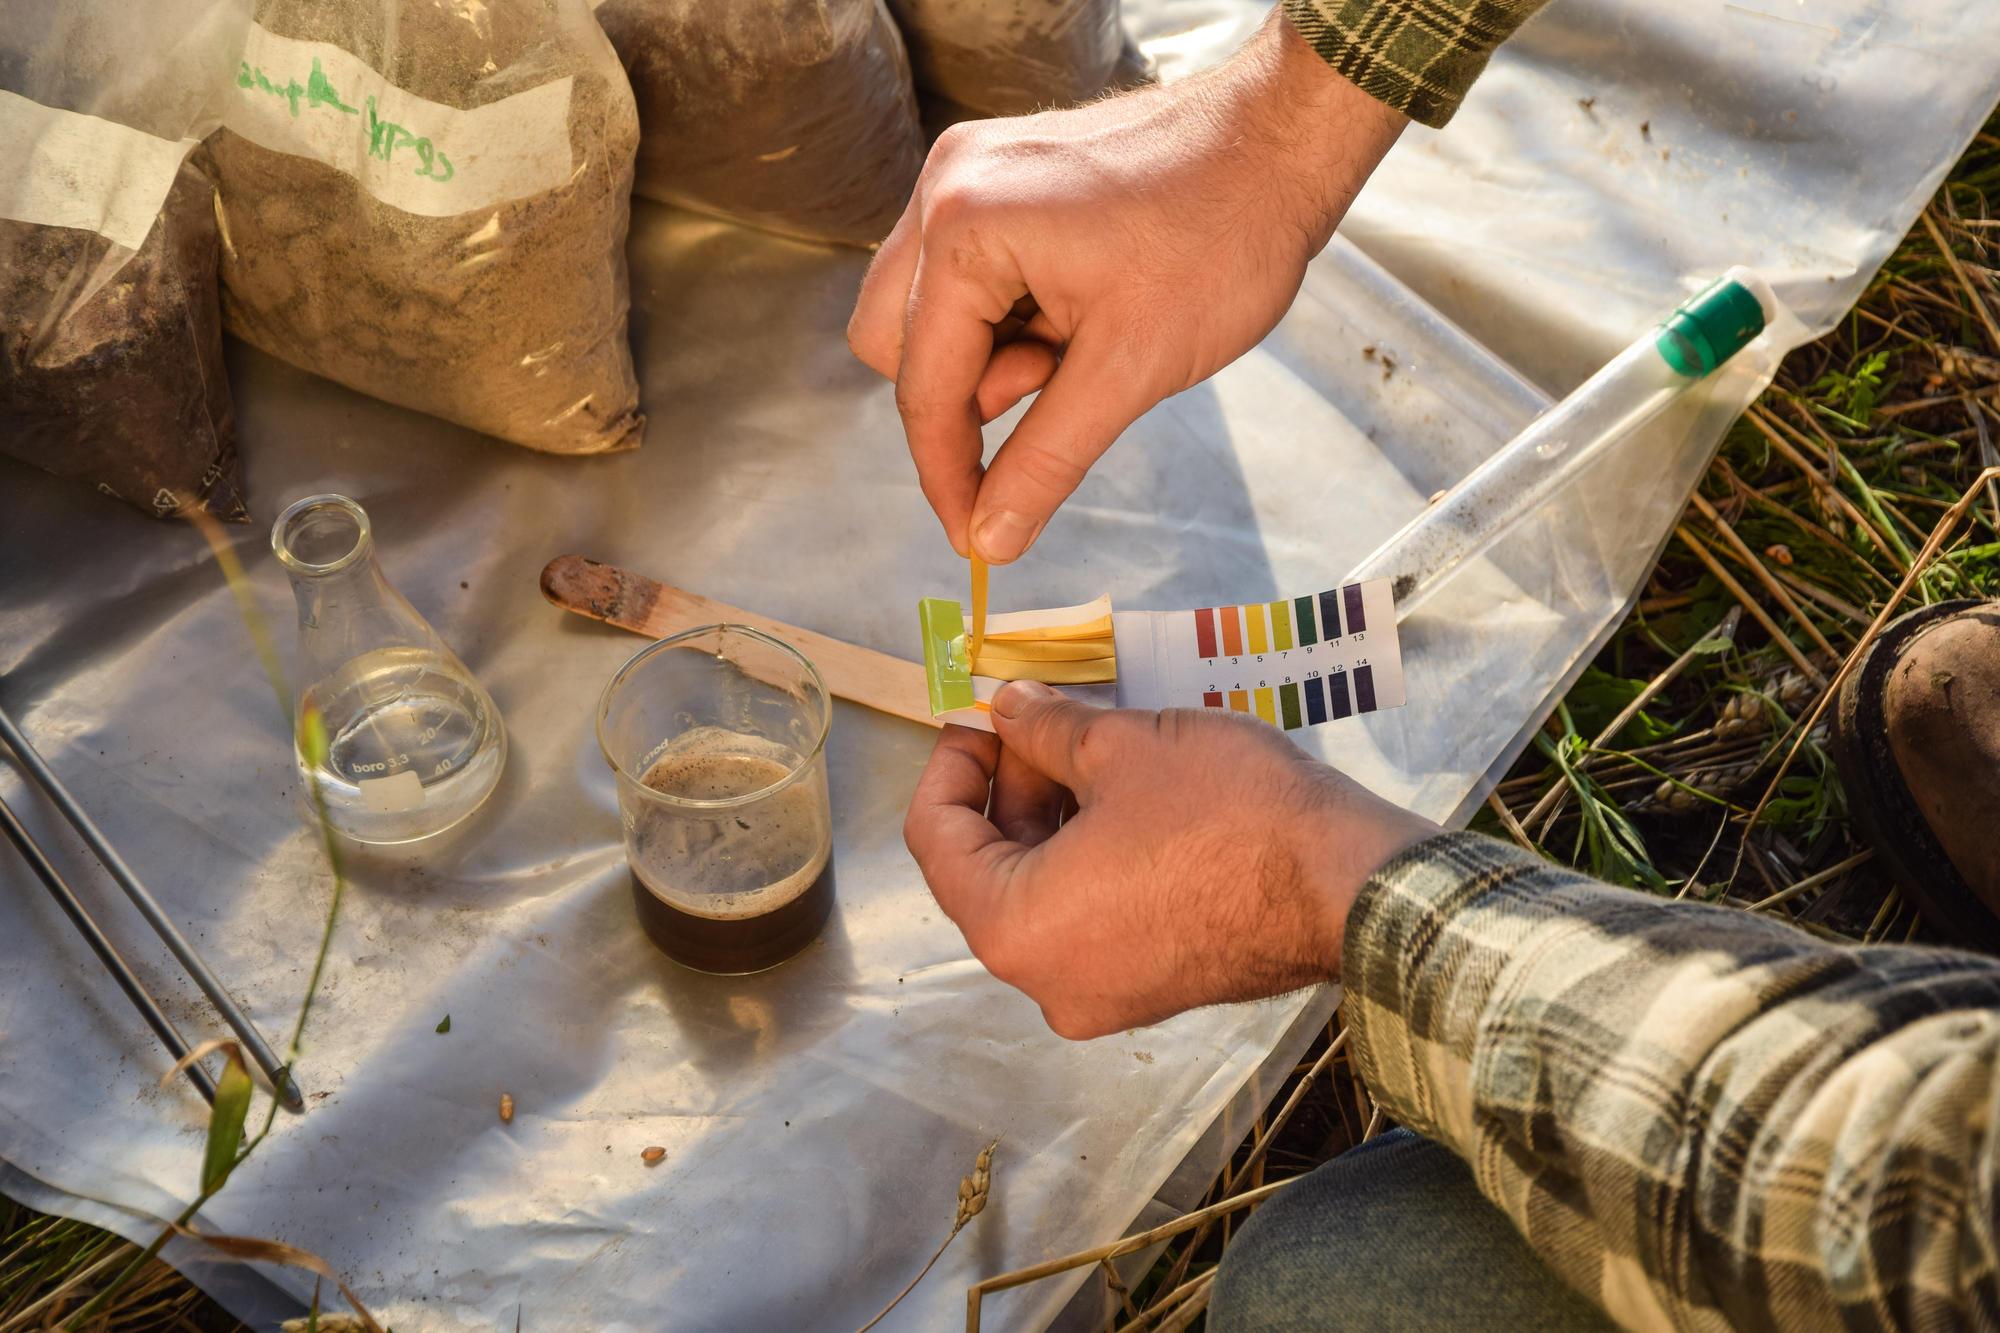 A gardener testing a sample of their soil with pH test strips and comparing the results to the included guide.